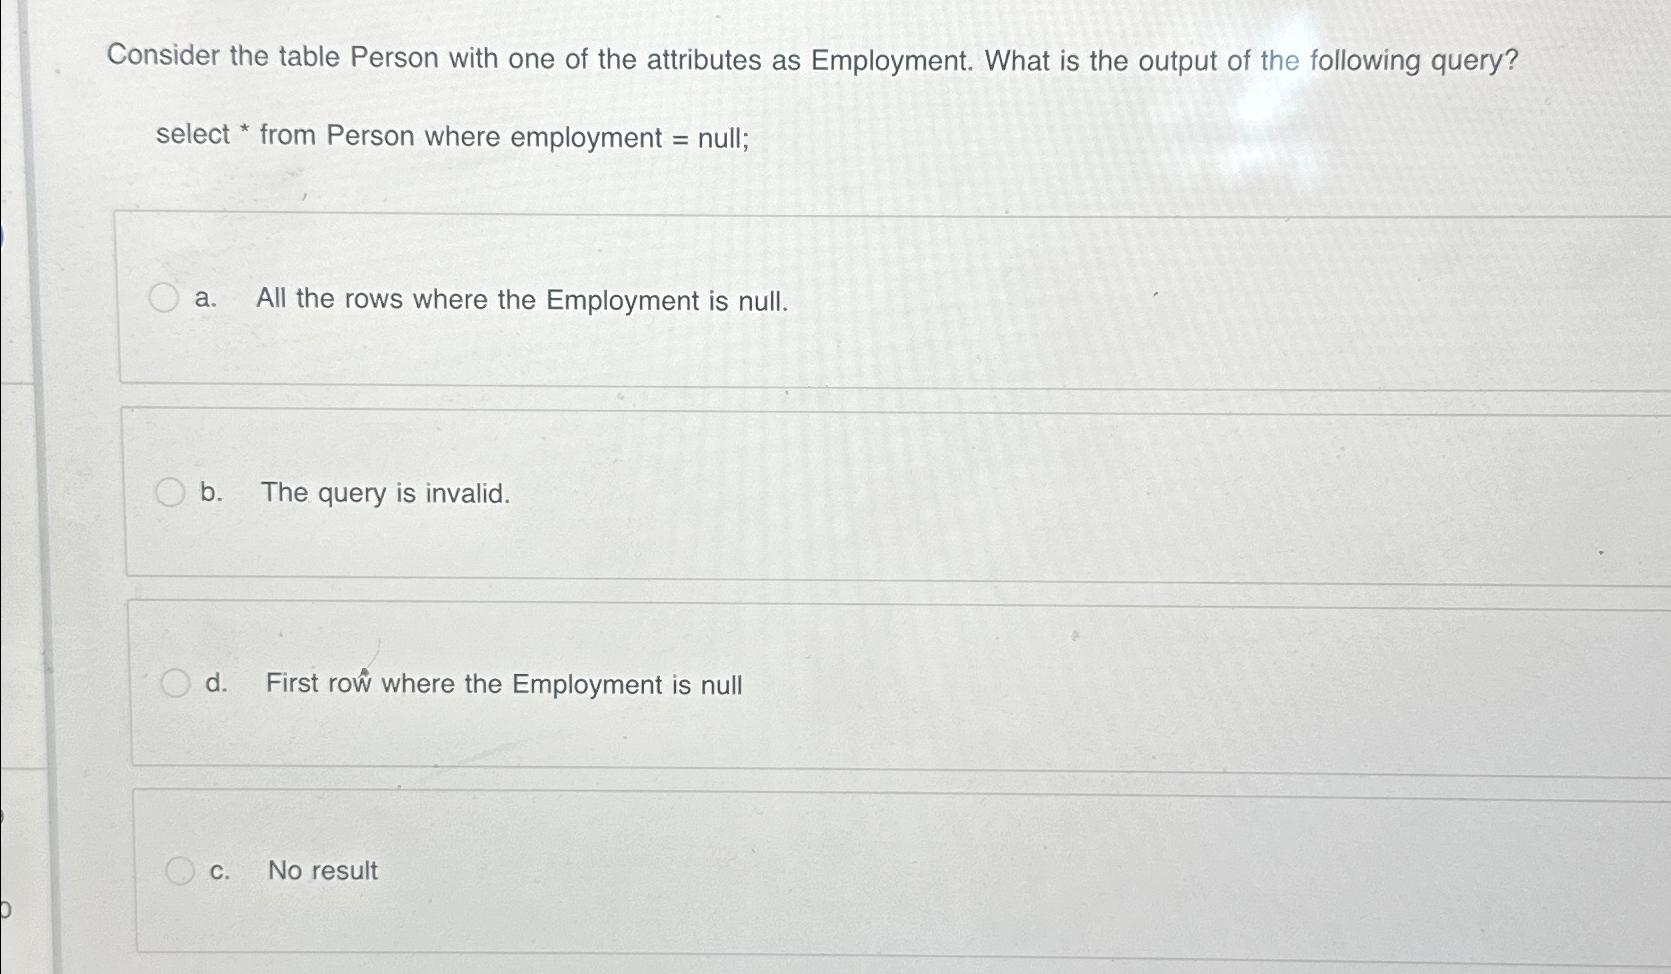 Consider the table Person with one of the attributes as Employment. What is the output of the following